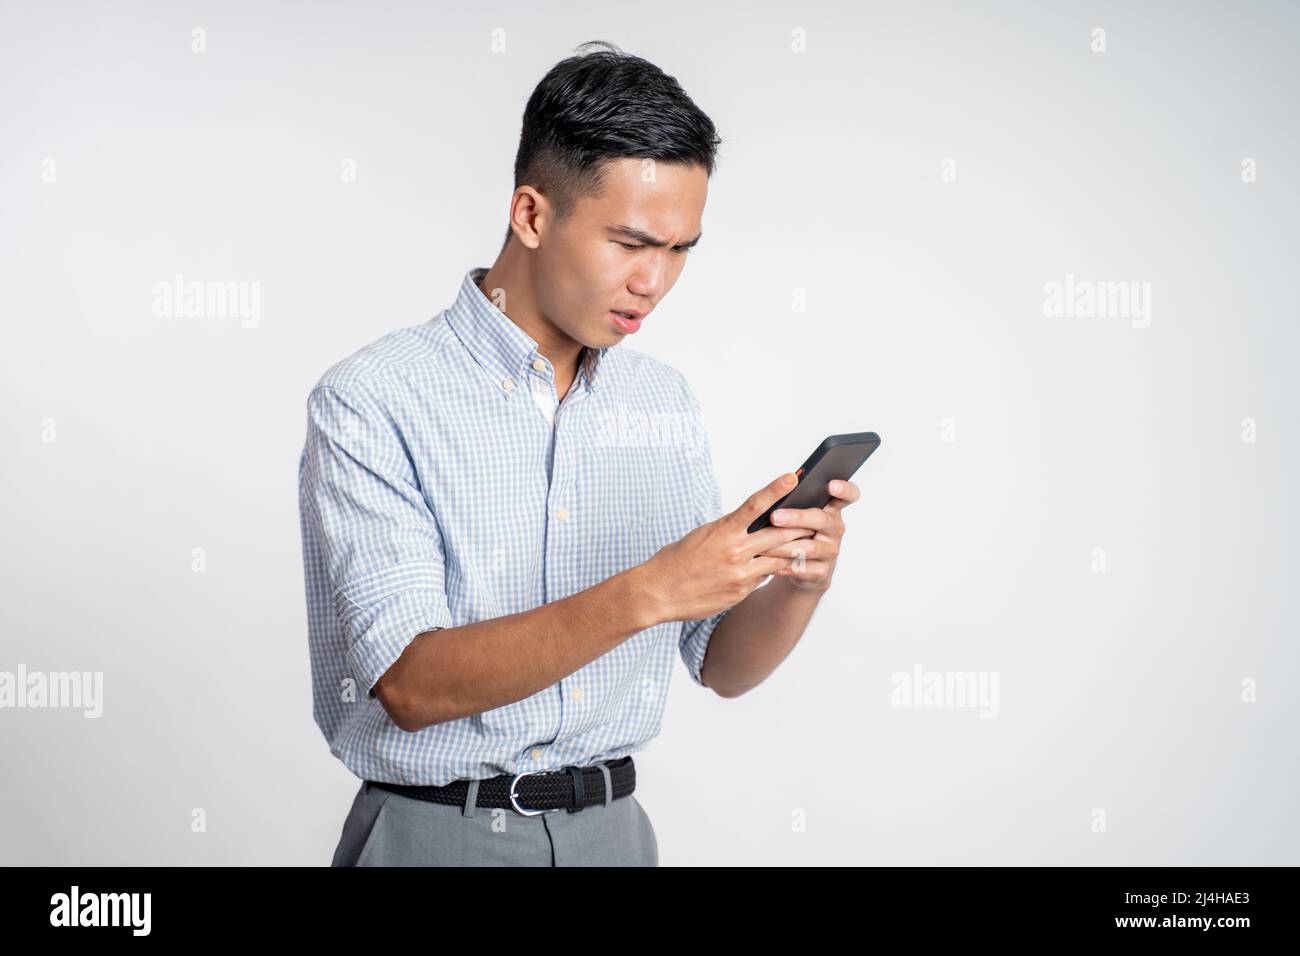 confuse young businessman while looking at his smartphone Stock Photo